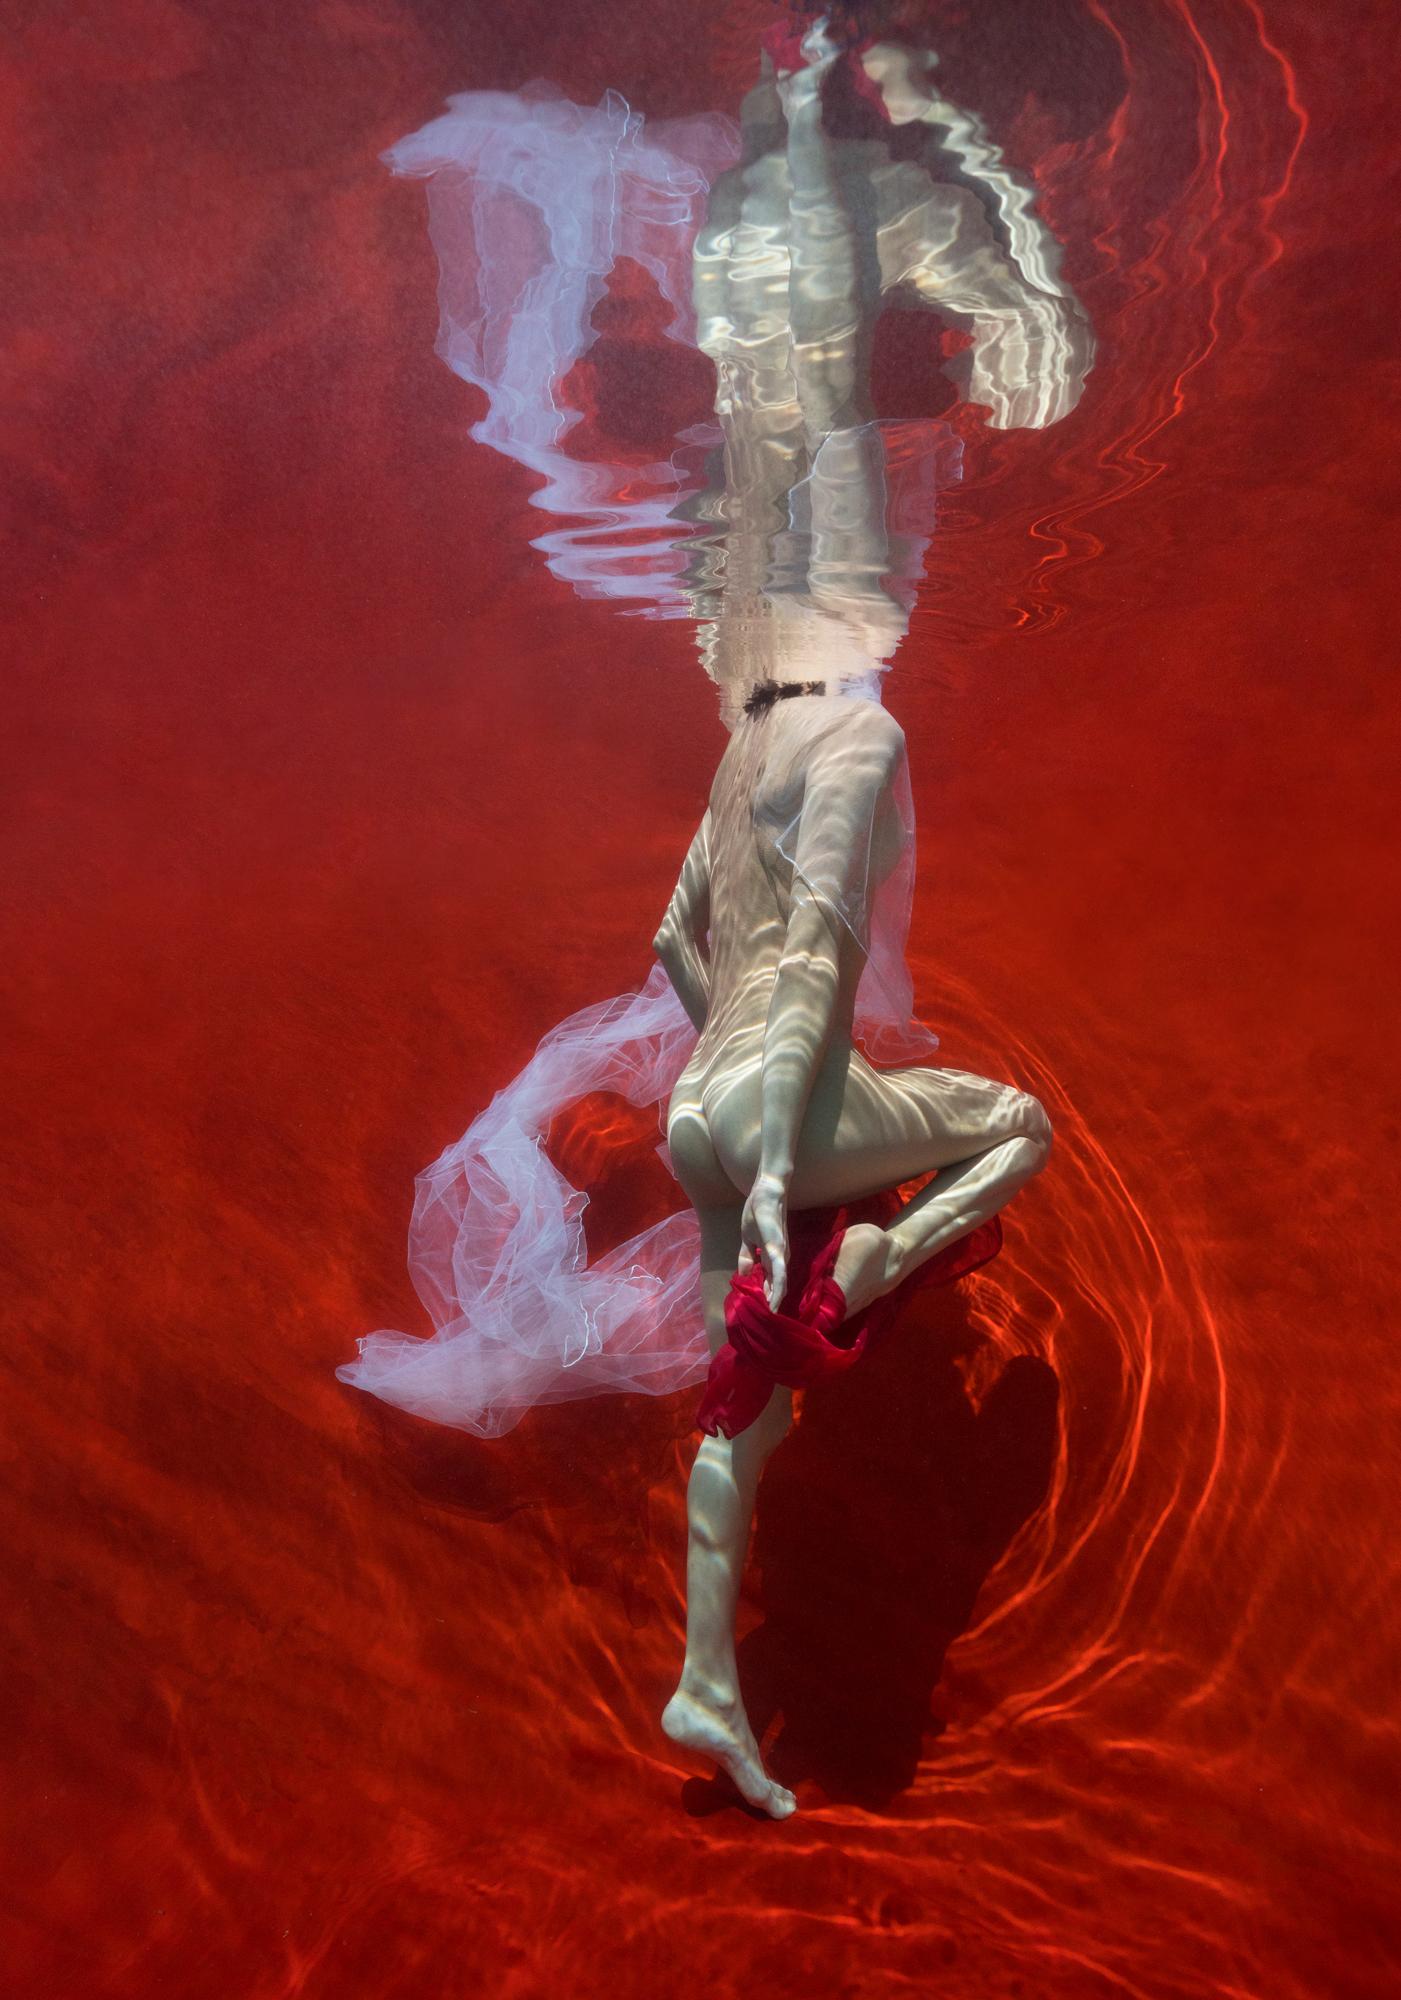 Alex Sher Nude Photograph - Blood and Milk VII  - underwater nude photograph - print on aluminum 36" x 24"